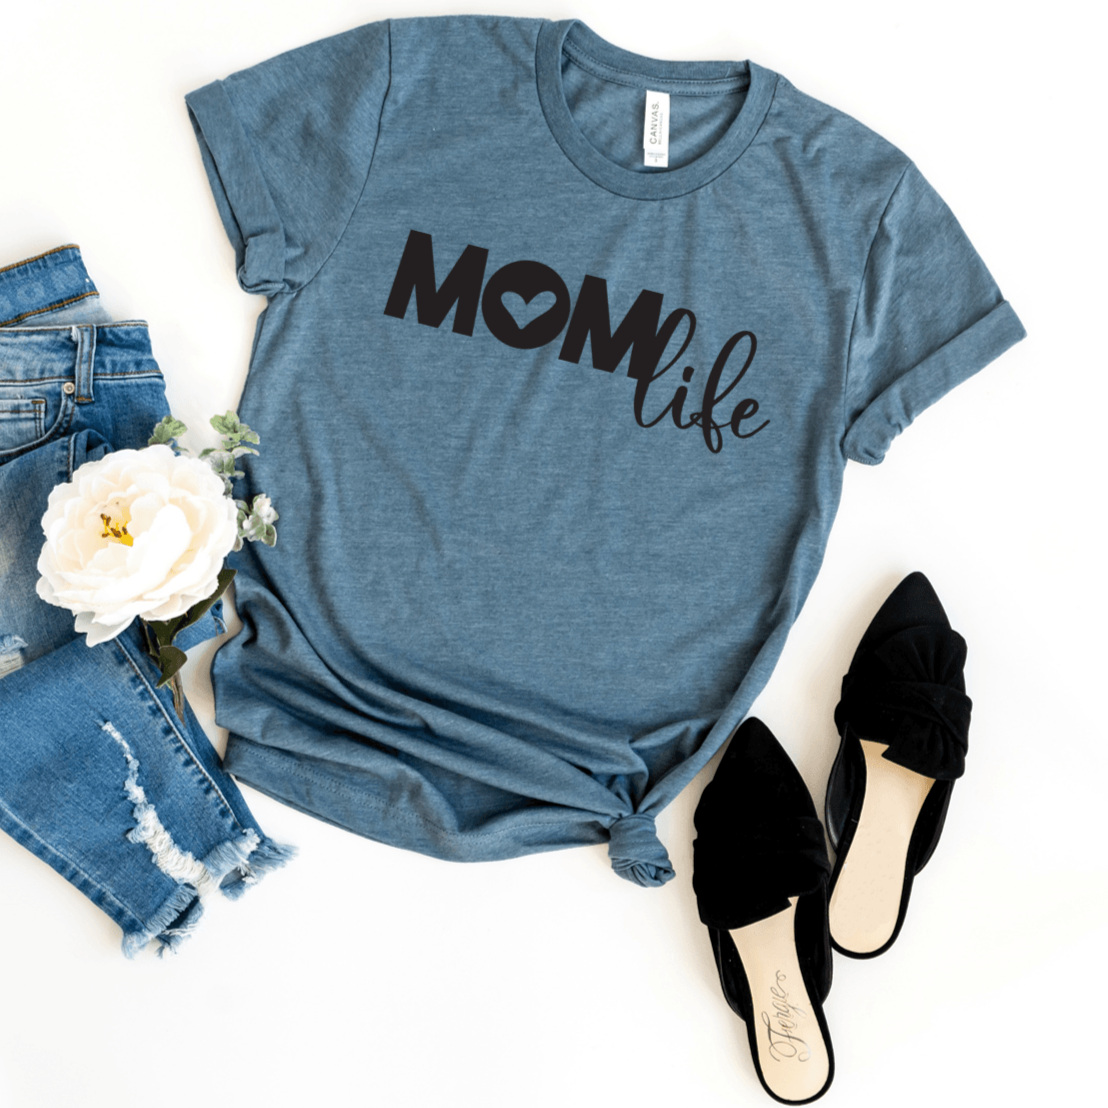 Mom life (Mom all caps with heart for center of O; life in script) in black on a heather deep teal bella canvas 3001cvc t-shirt.